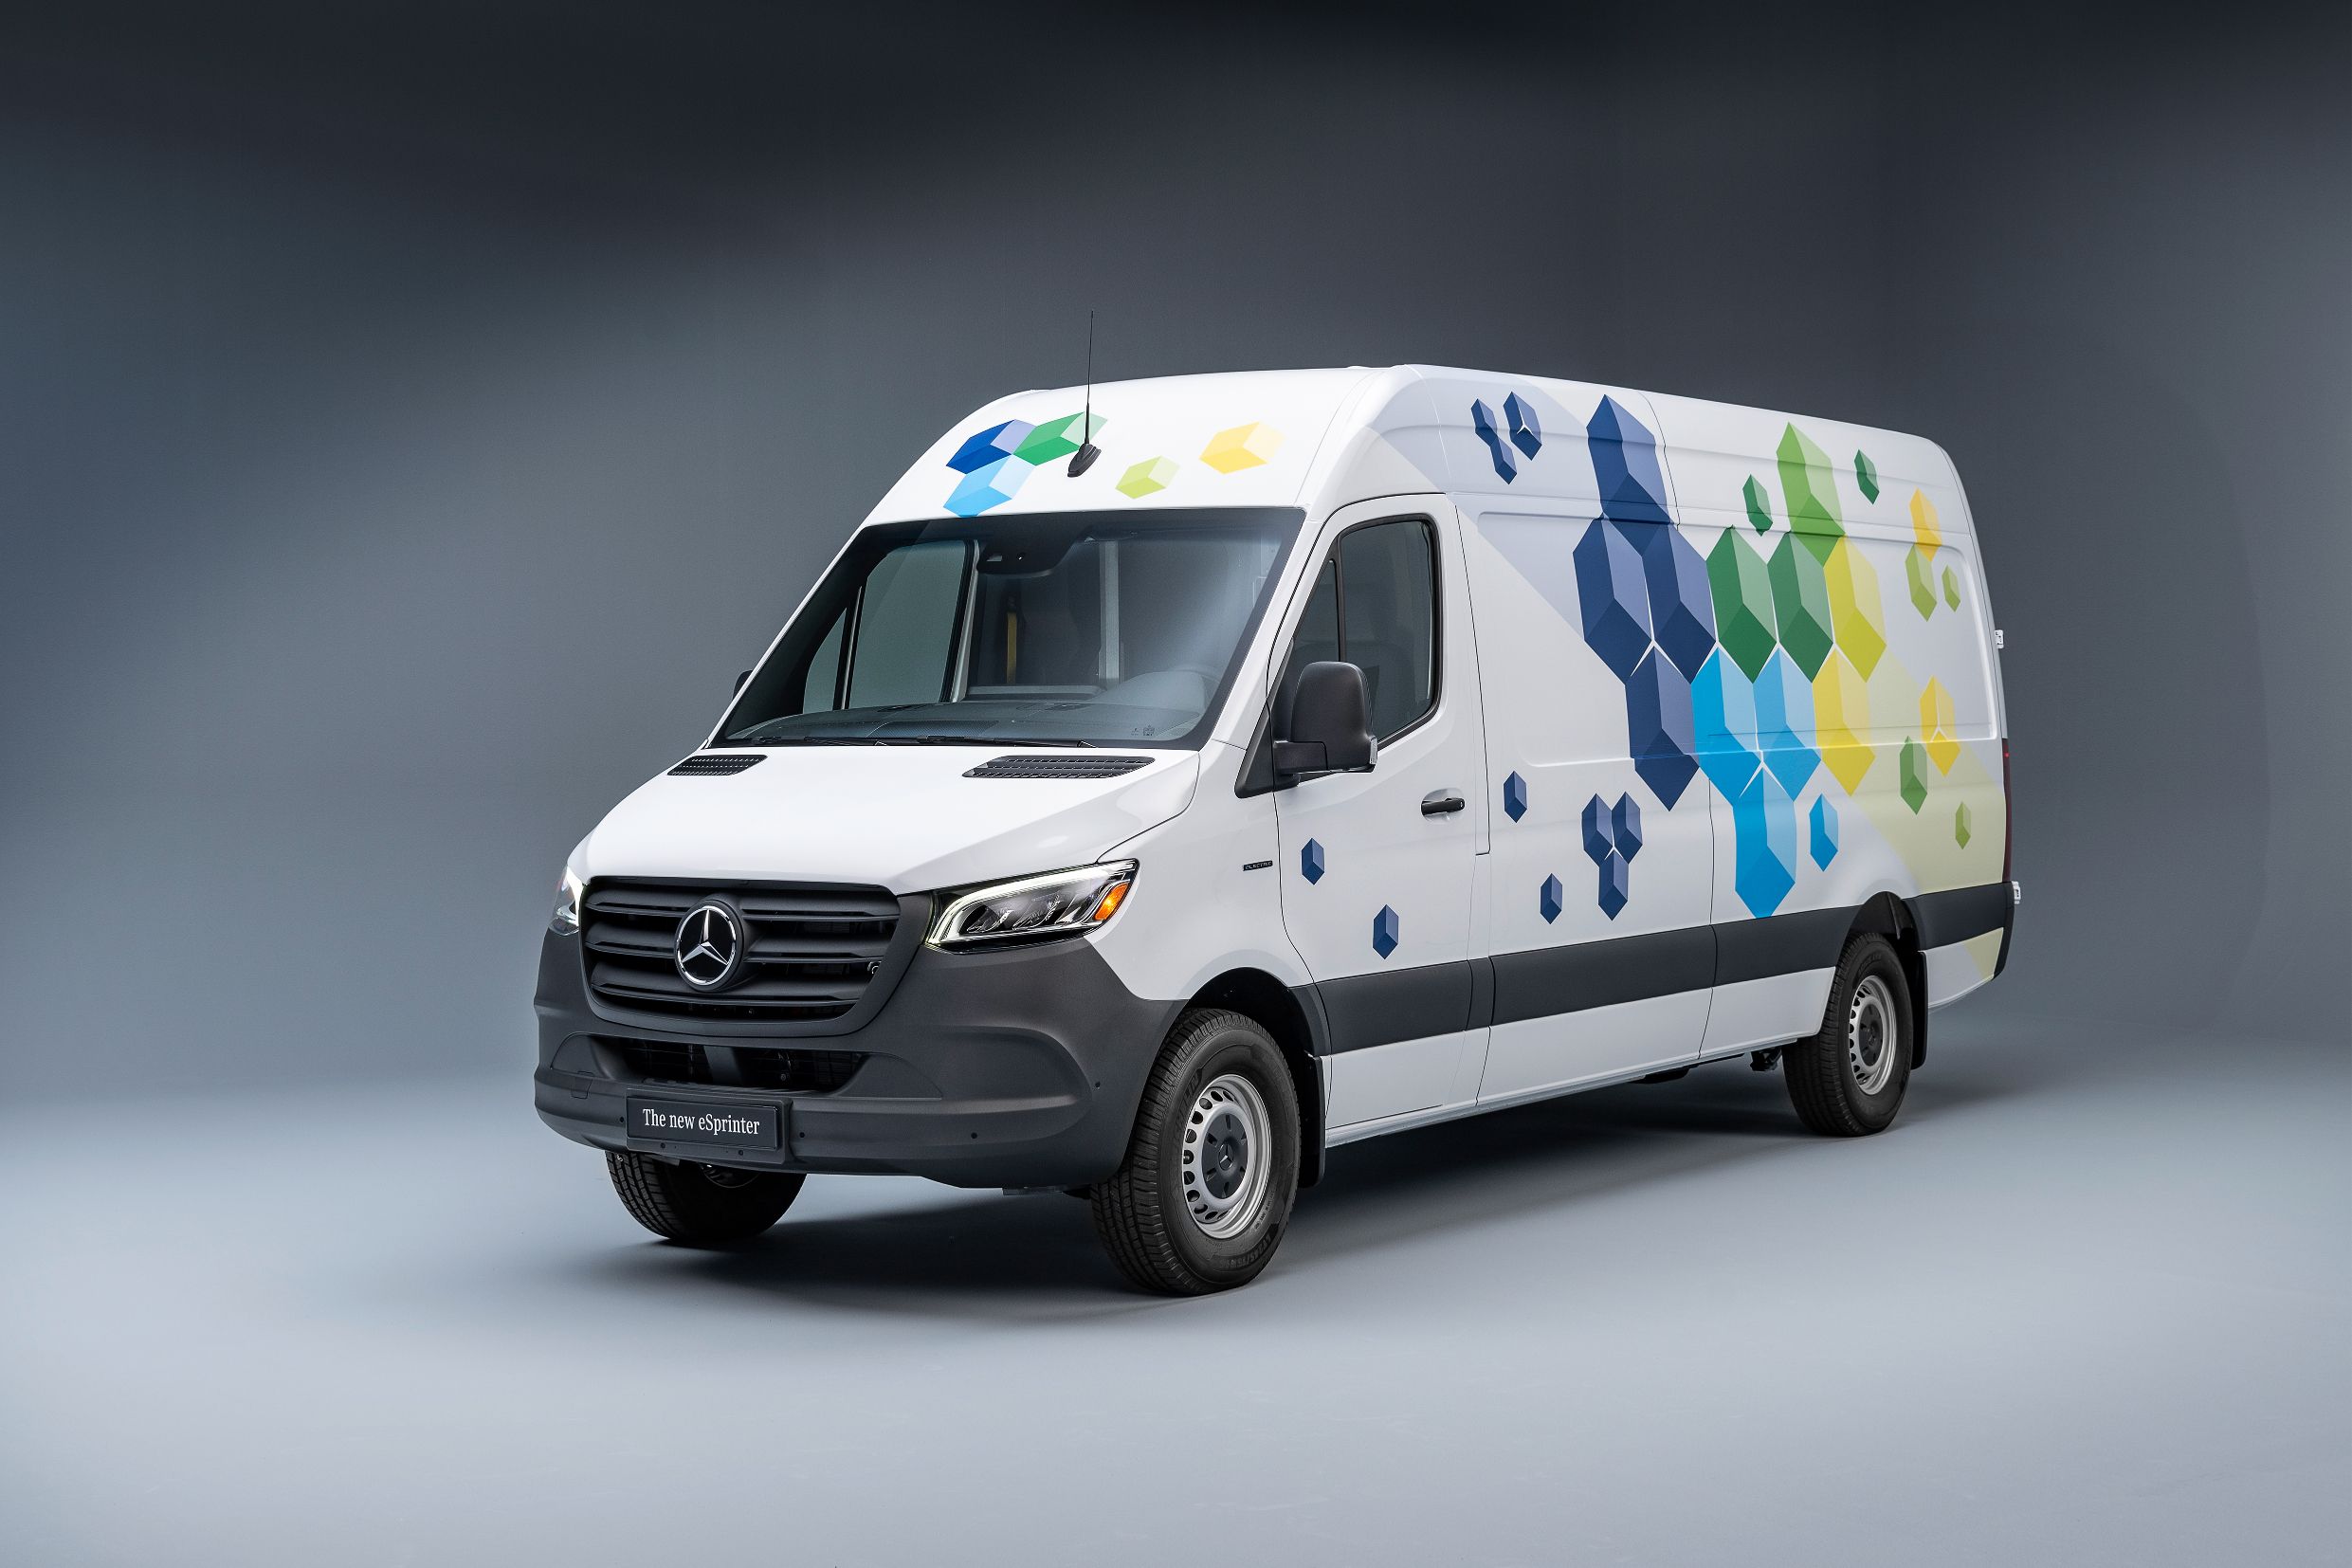 The Unlikely History of the Mercedes-Benz Sprinter Van